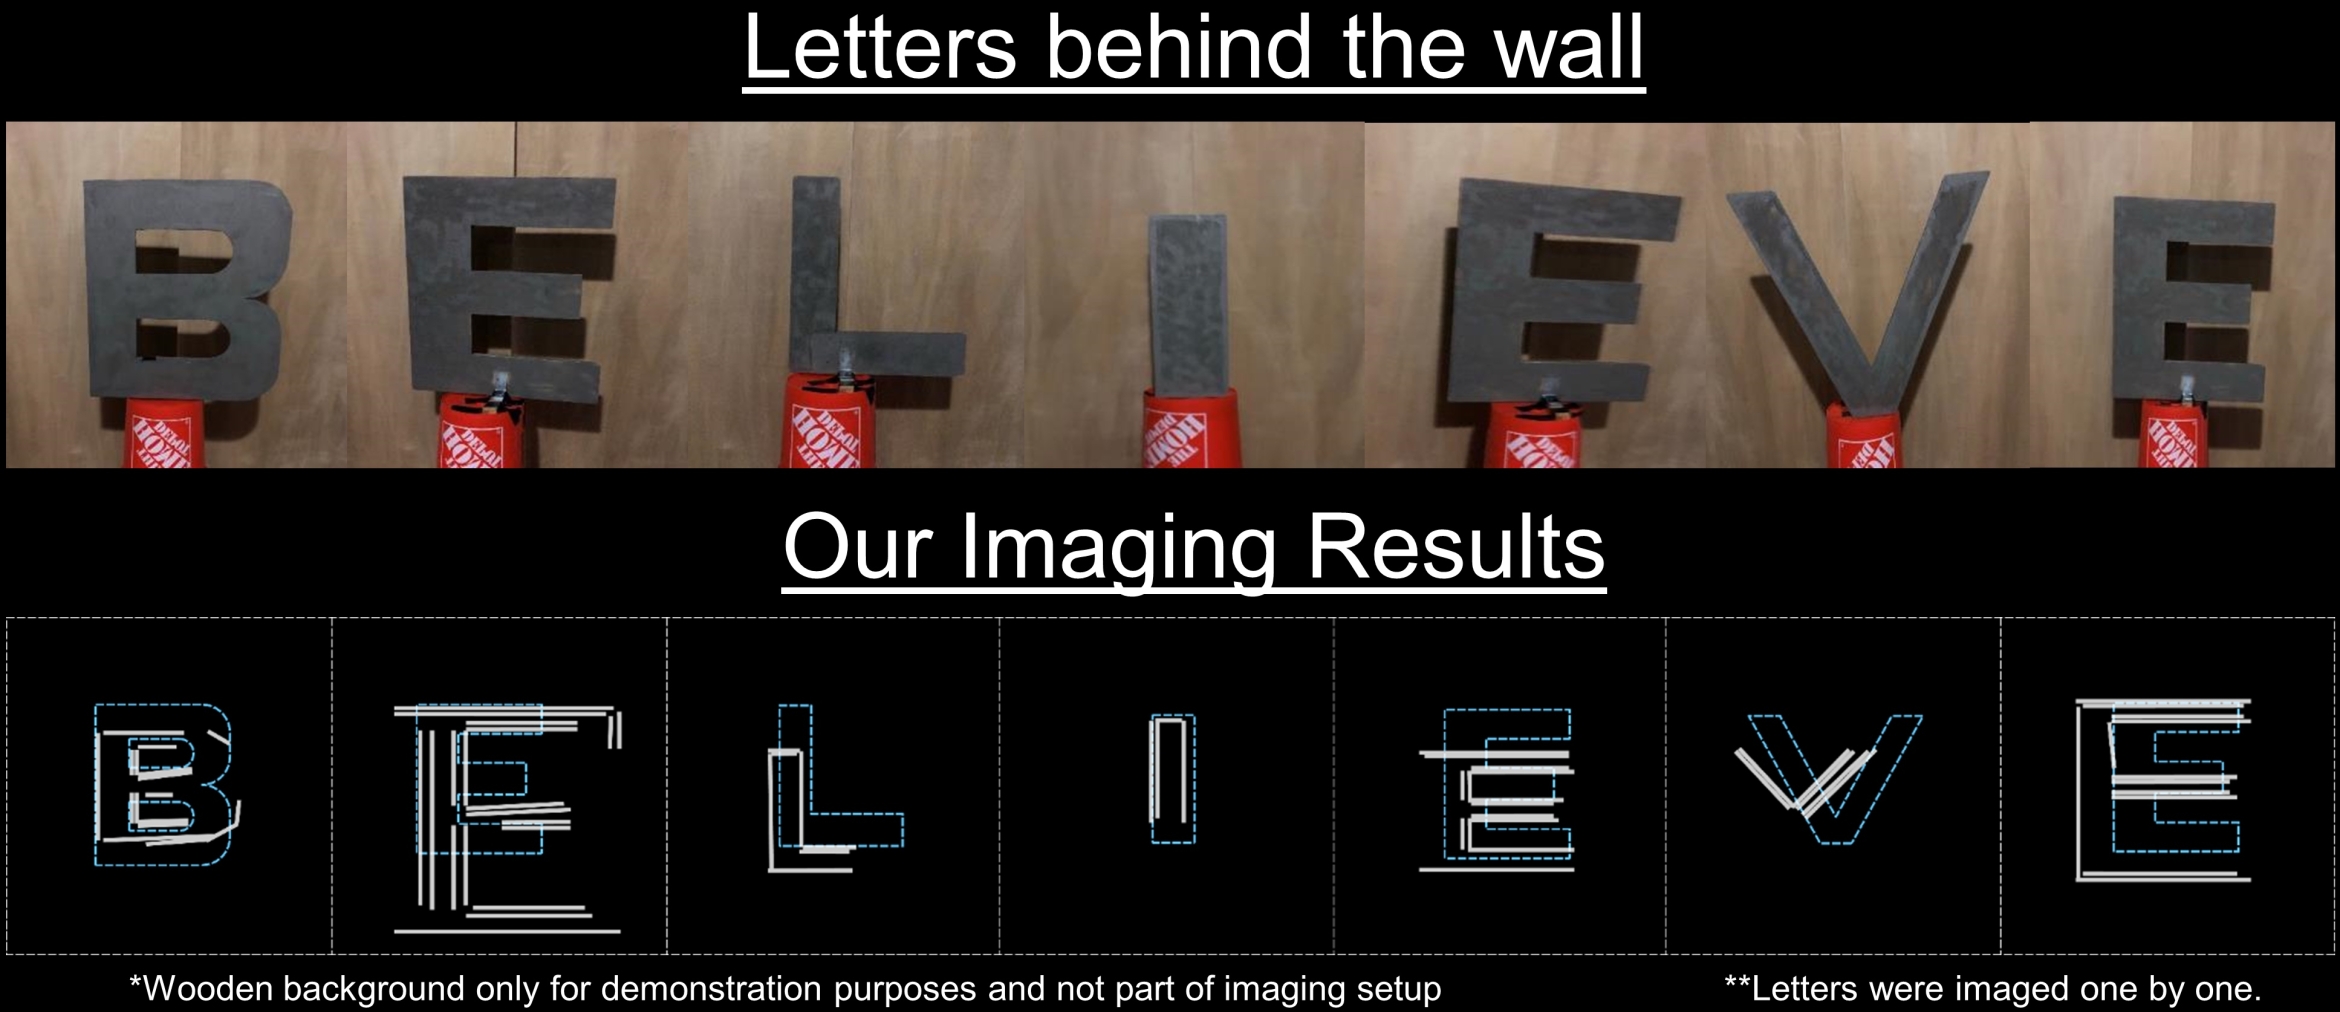 The letters BELIEVE as imaged by WiFi